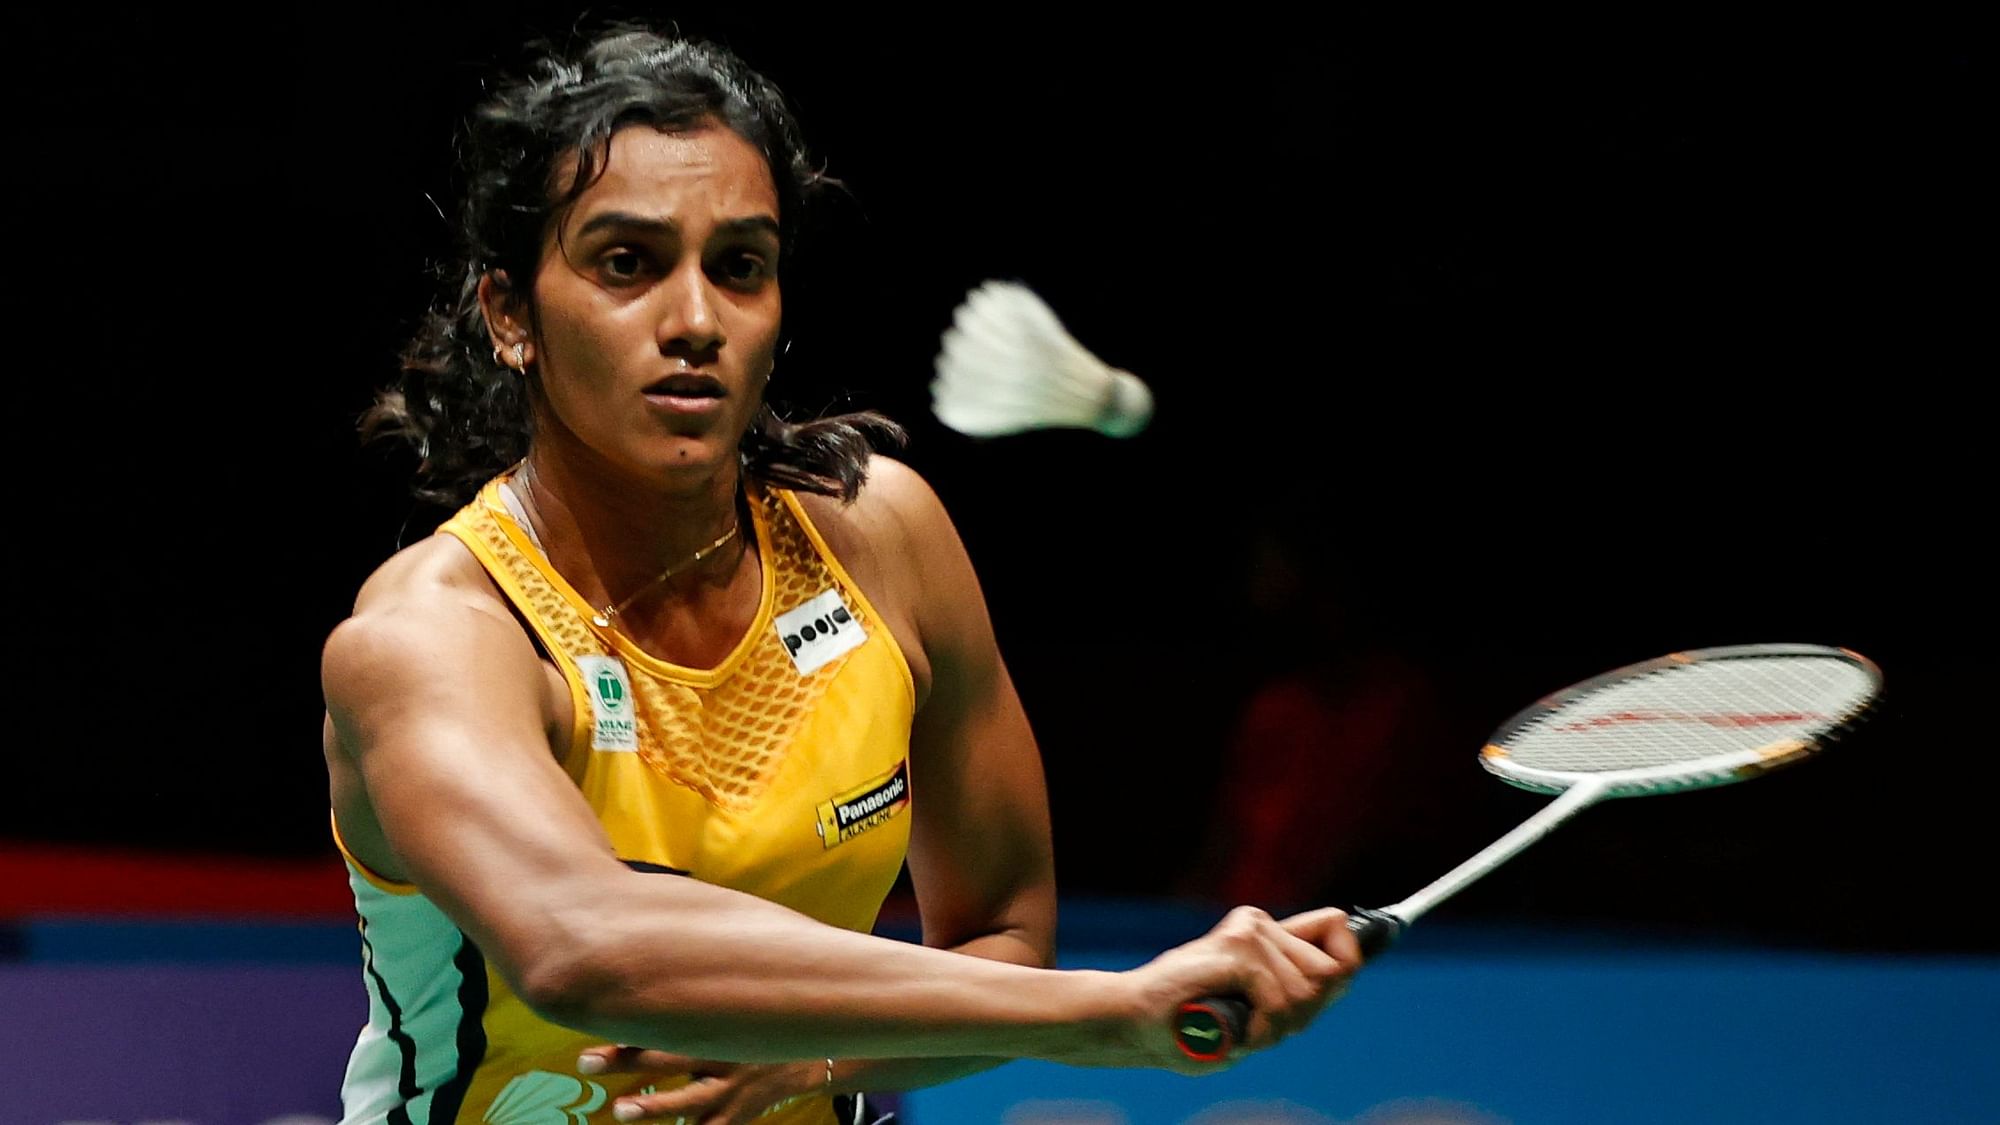 Former winners Hyderabad Hunters, led by world champion PV Sindhu, will face-off with North Eastern Warriors at home in the fifth Premier Badminton League (PBL) on Wednesday, 28 January.